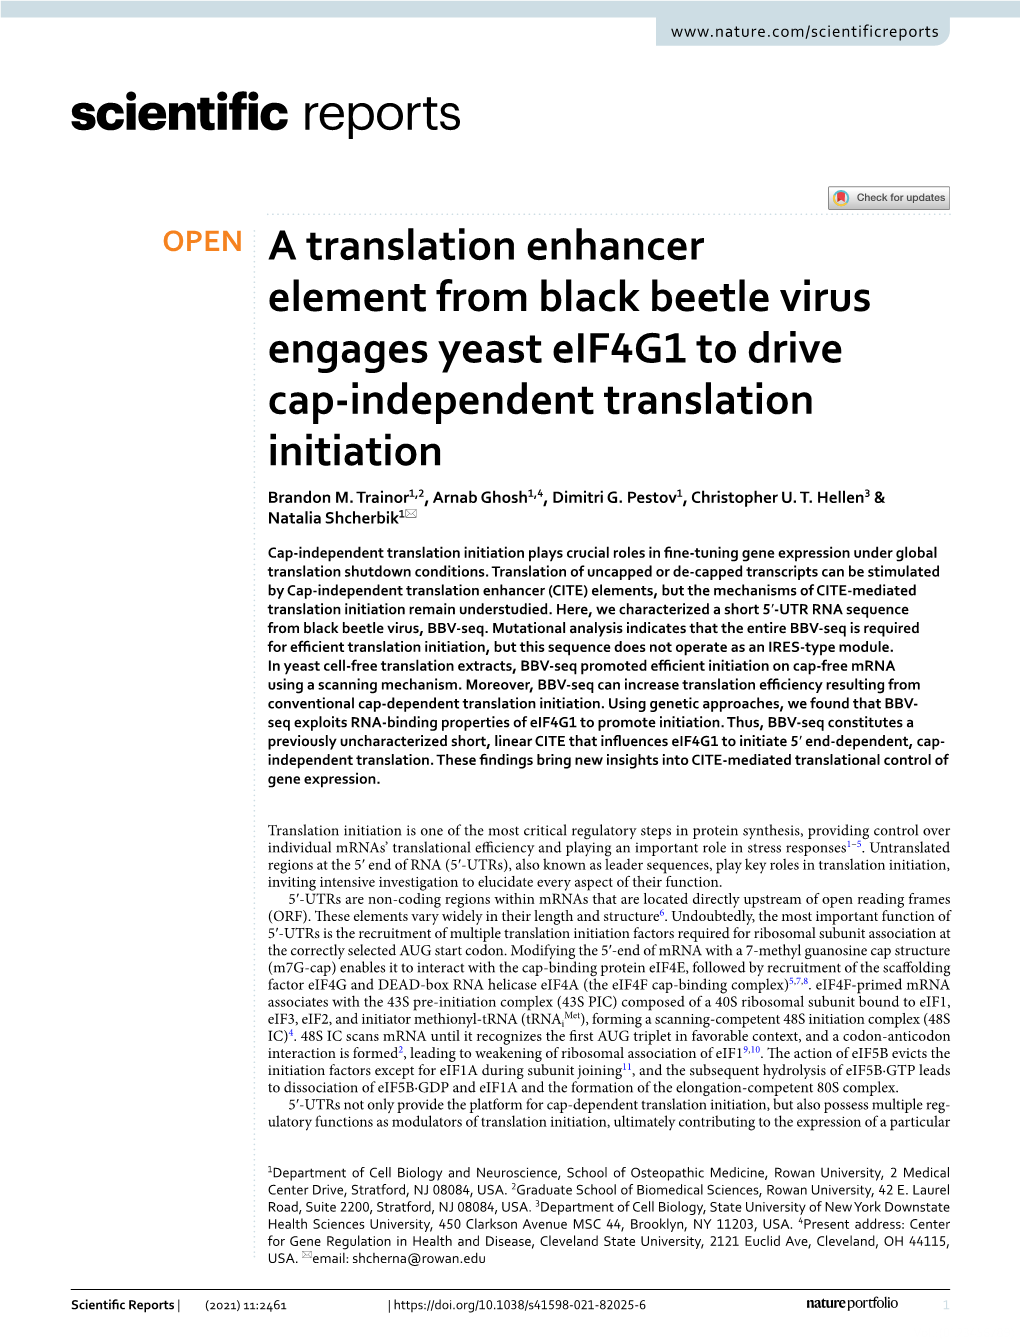 A Translation Enhancer Element from Black Beetle Virus Engages Yeast Eif4g1 to Drive Cap-Independent Translation Initiation